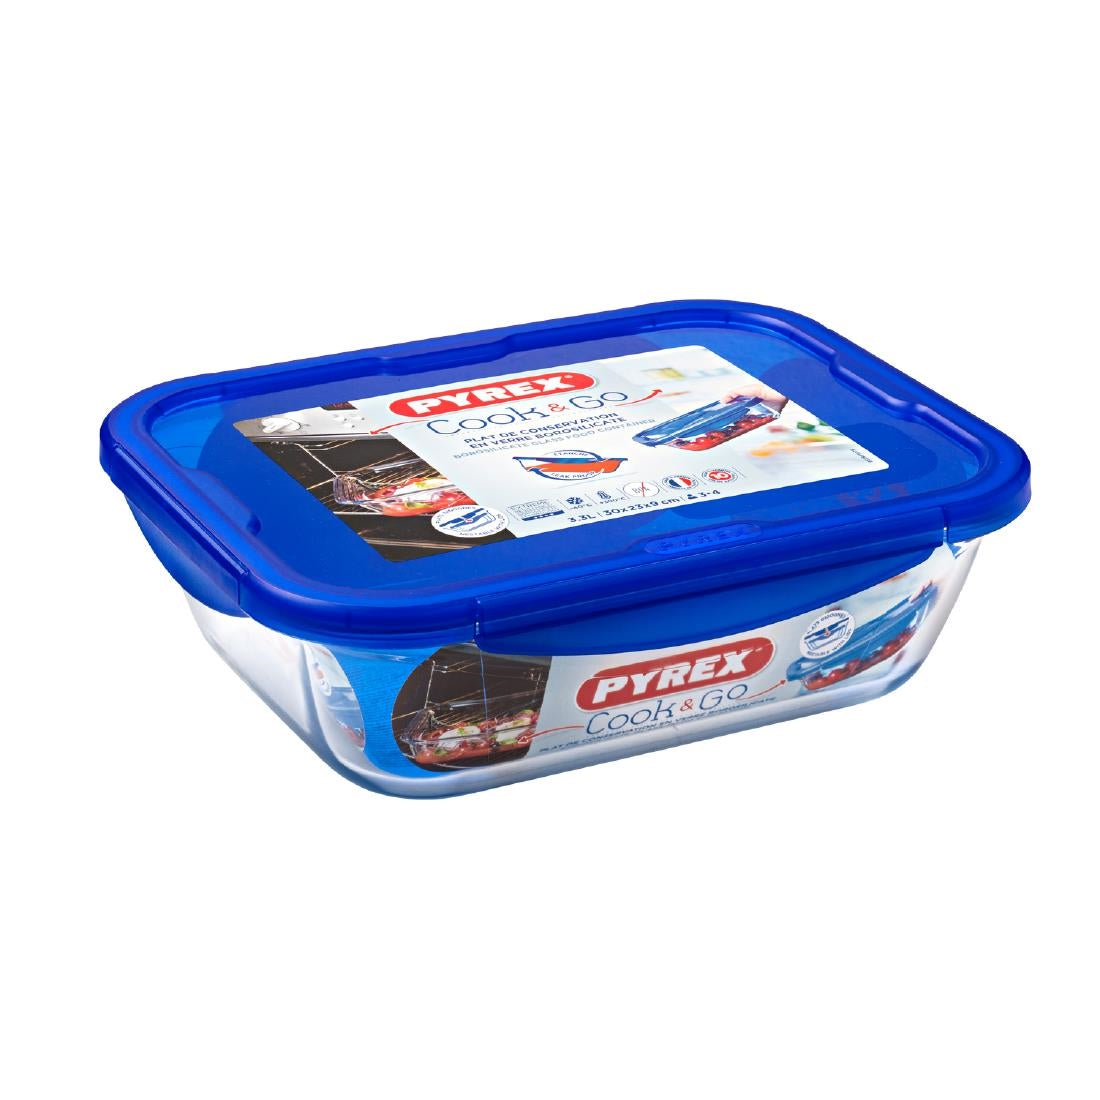 FU133 Pyrex Cook & Go Large Rectangular Dish With Lid 3.3Ltr